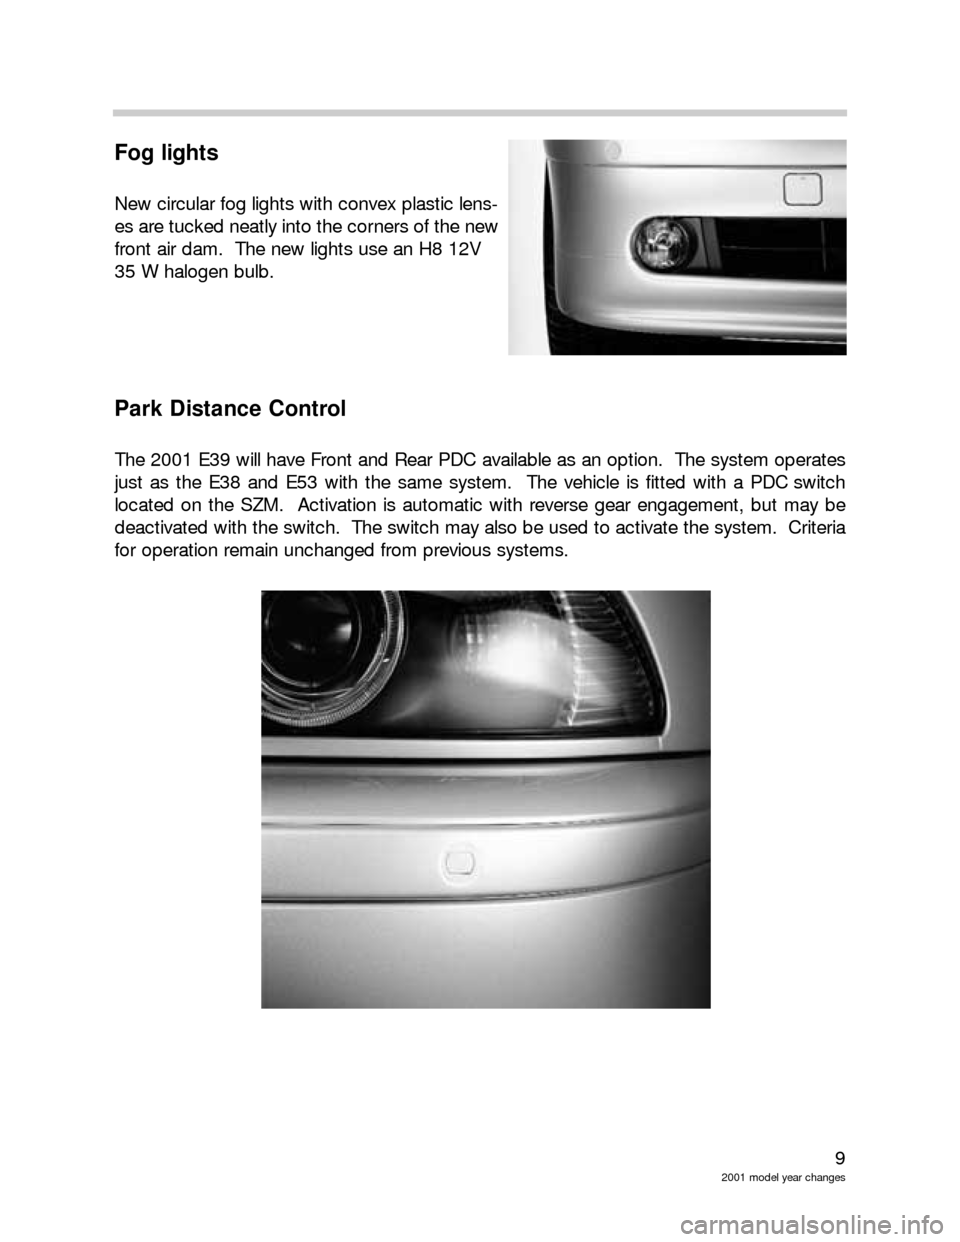 BMW Z8 2002 E52 Model Yar Changes 9
2001 model year changes
Fog lights
New circular fog lights with convex plastic lens-
es are tucked neatly into the corners of the new
front air dam.  The new lights use an H8 12V 
35 W halogen bulb.